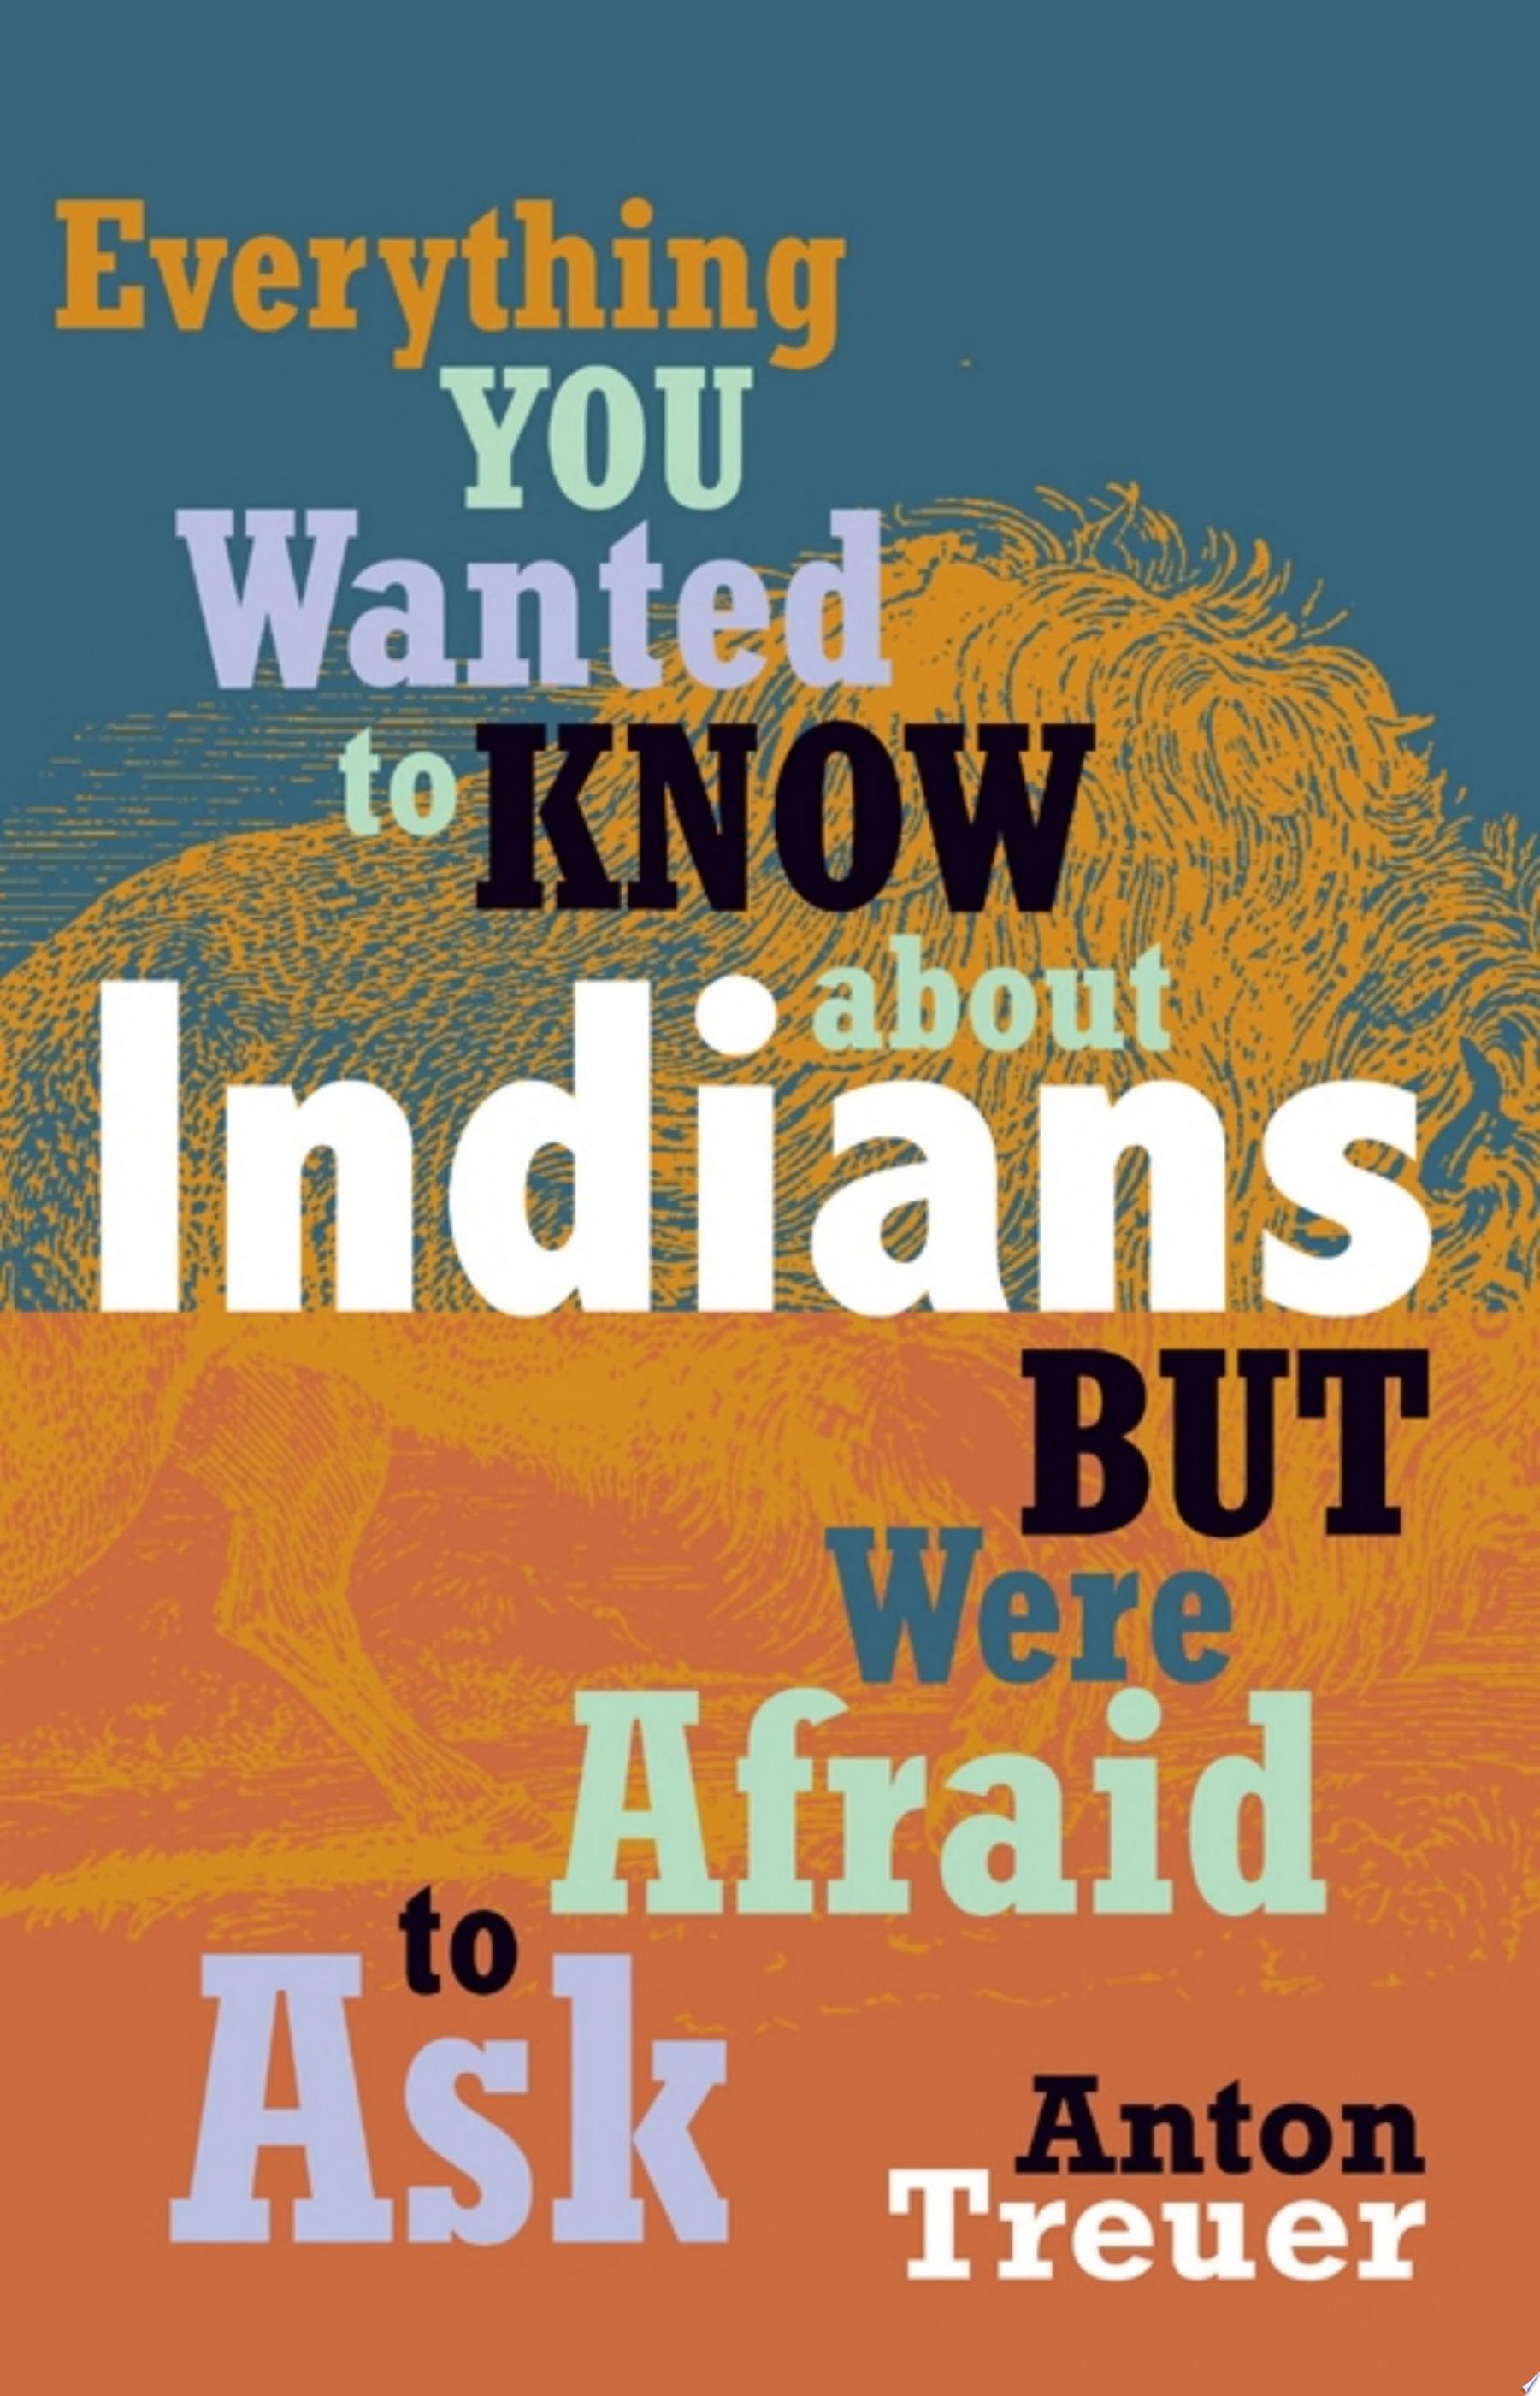 Image for "Everything You Wanted to Know about Indians But Were Afraid to Ask"